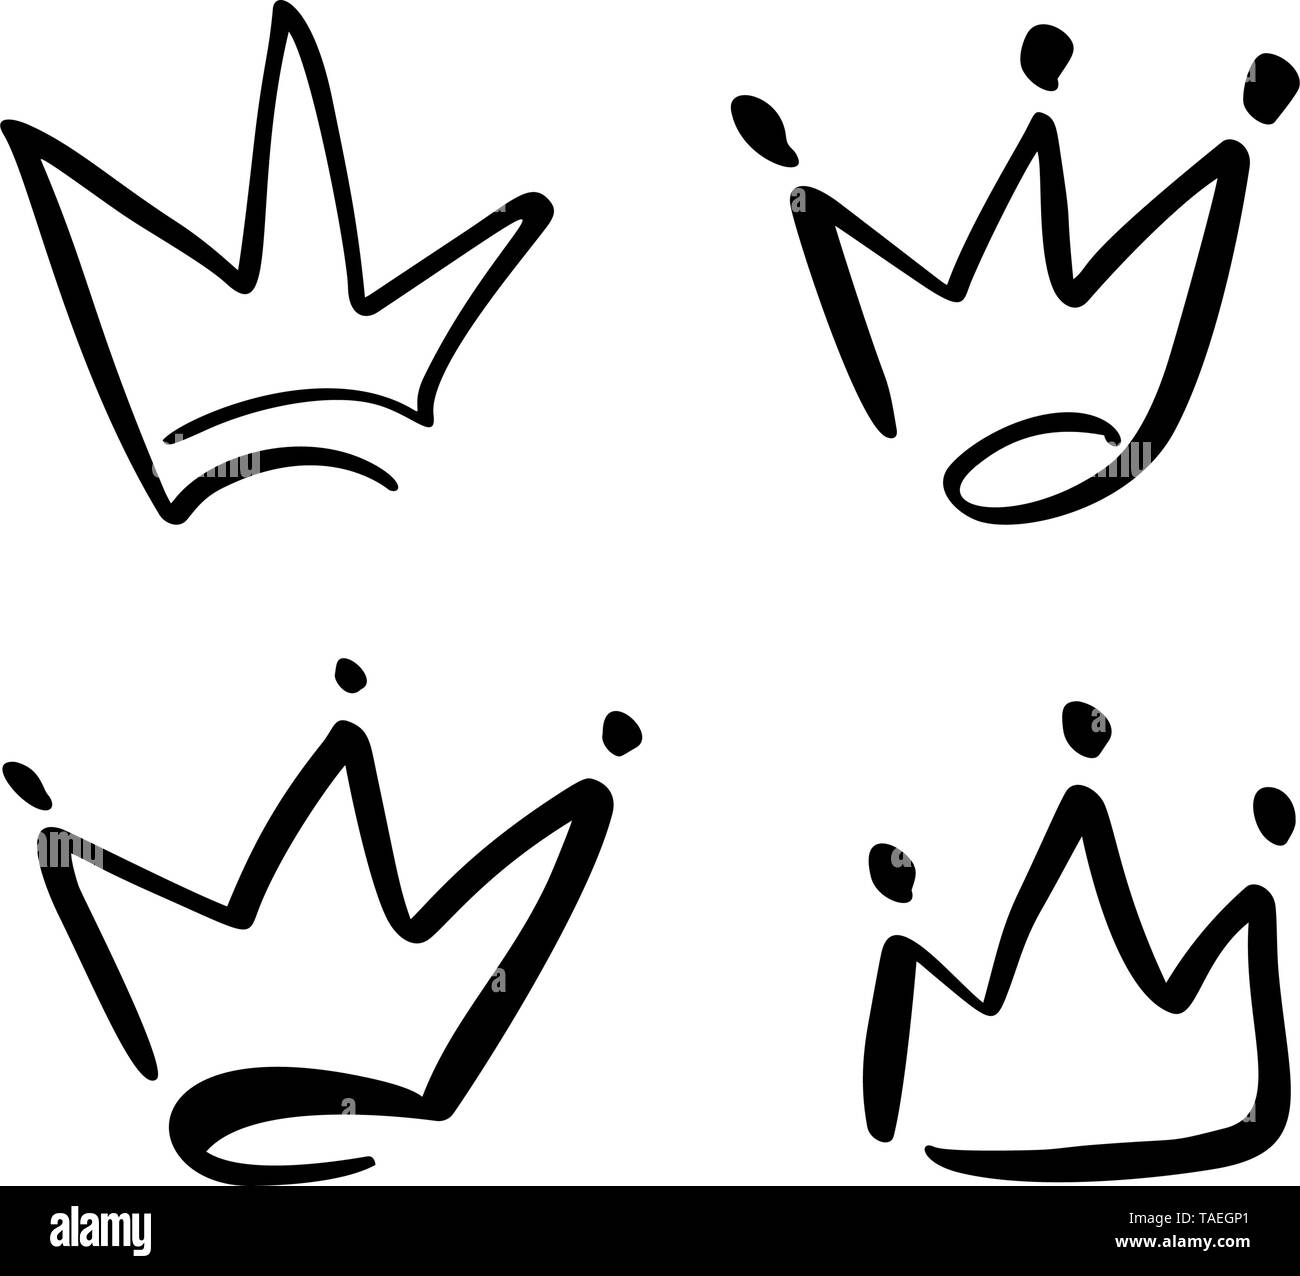 Set of hand drawn symbol of a stylized crown. Drawn with a black ink and brush. Vector illustration isolated on white. Logo design. Grunge brush Stock Vector